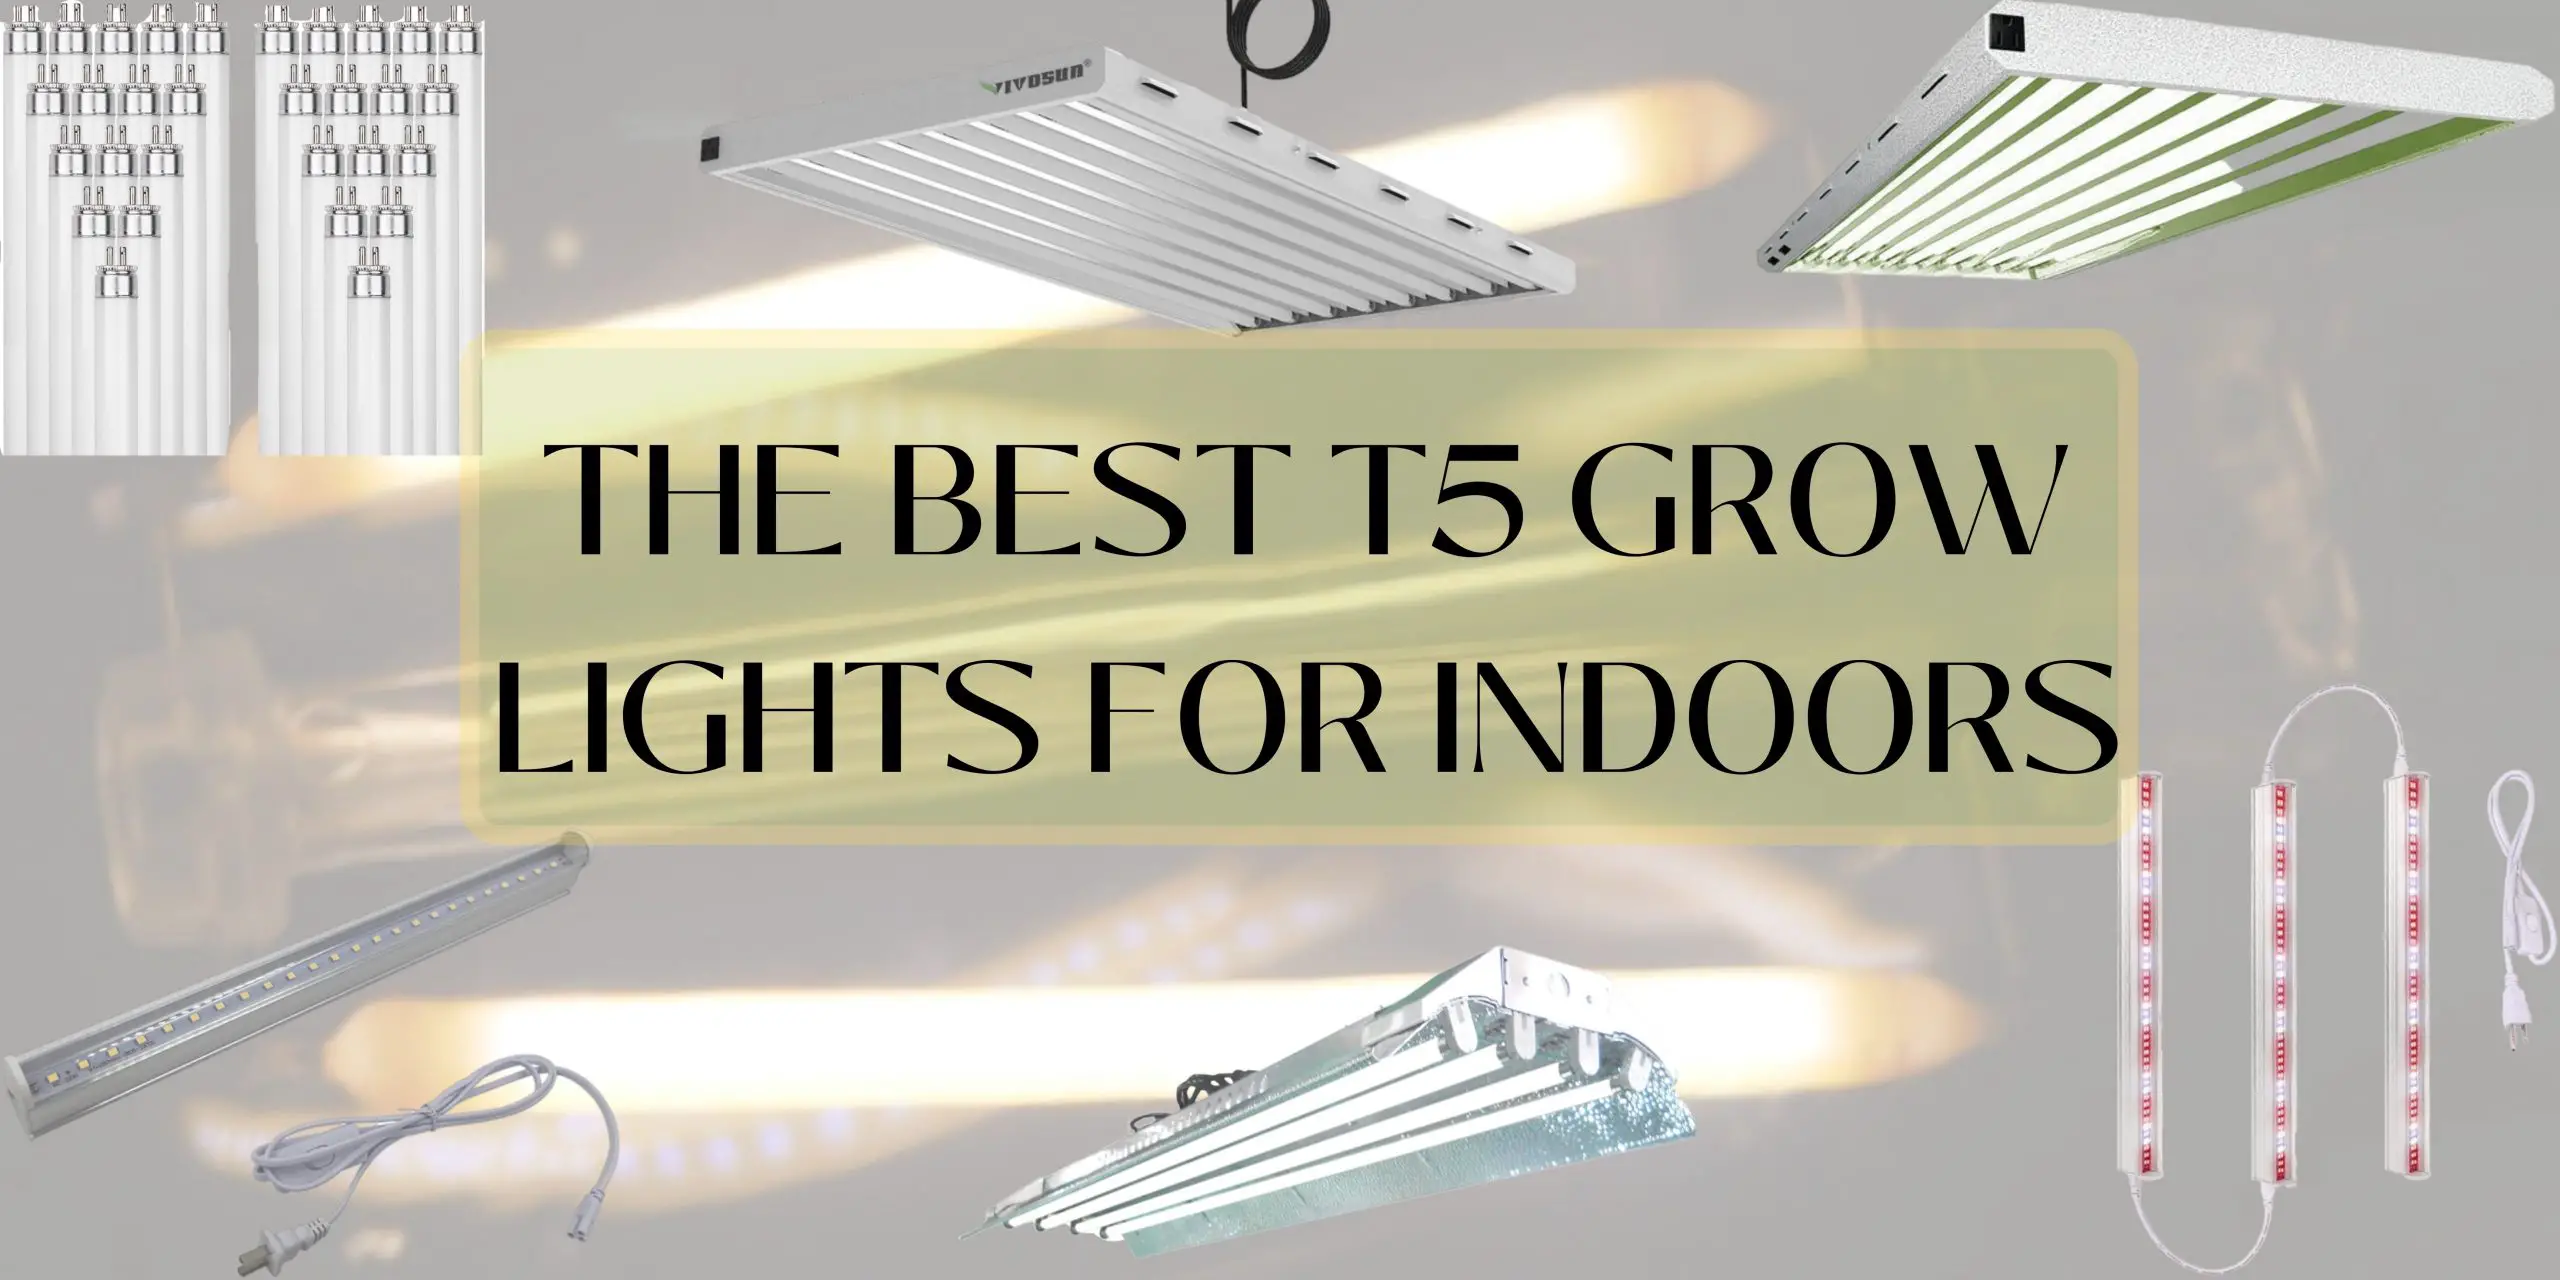 T5 Grow Lights for Indoors